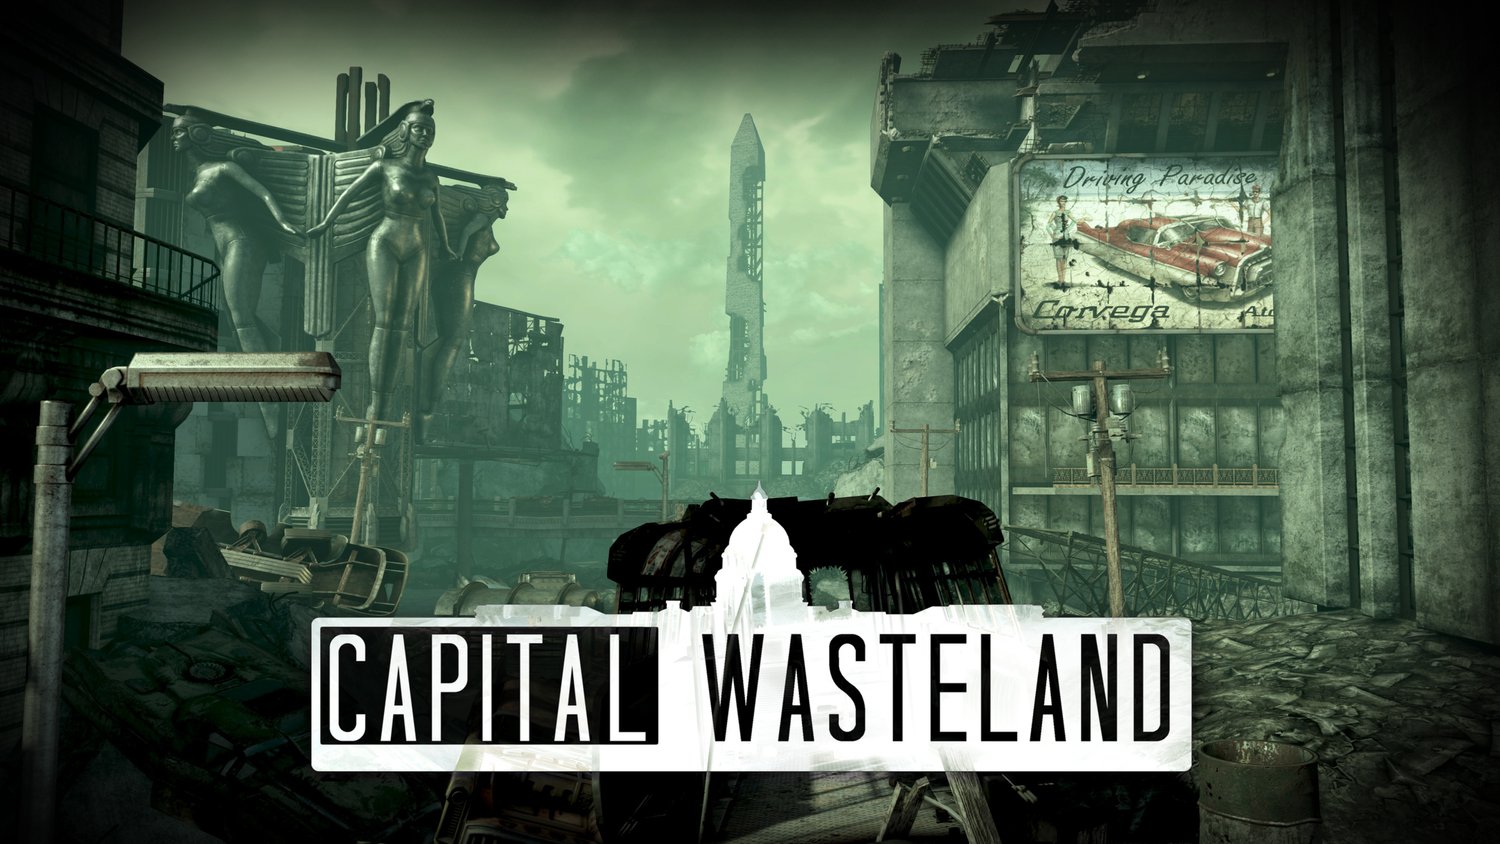 Fallout 4: The Capital Wasteland